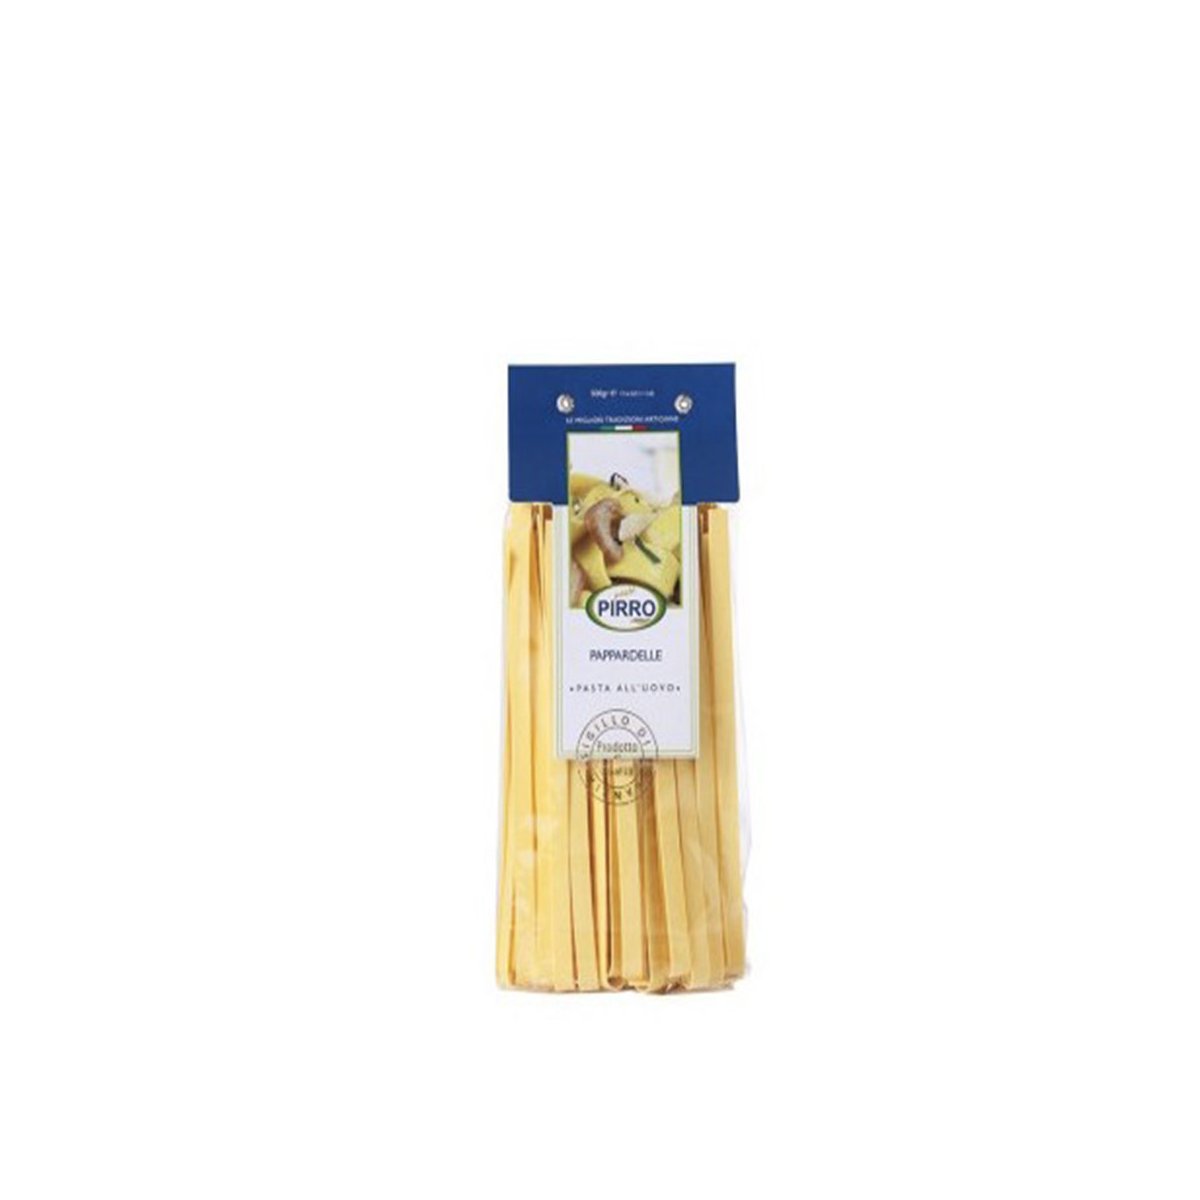 Pappardelle Uovo 500g